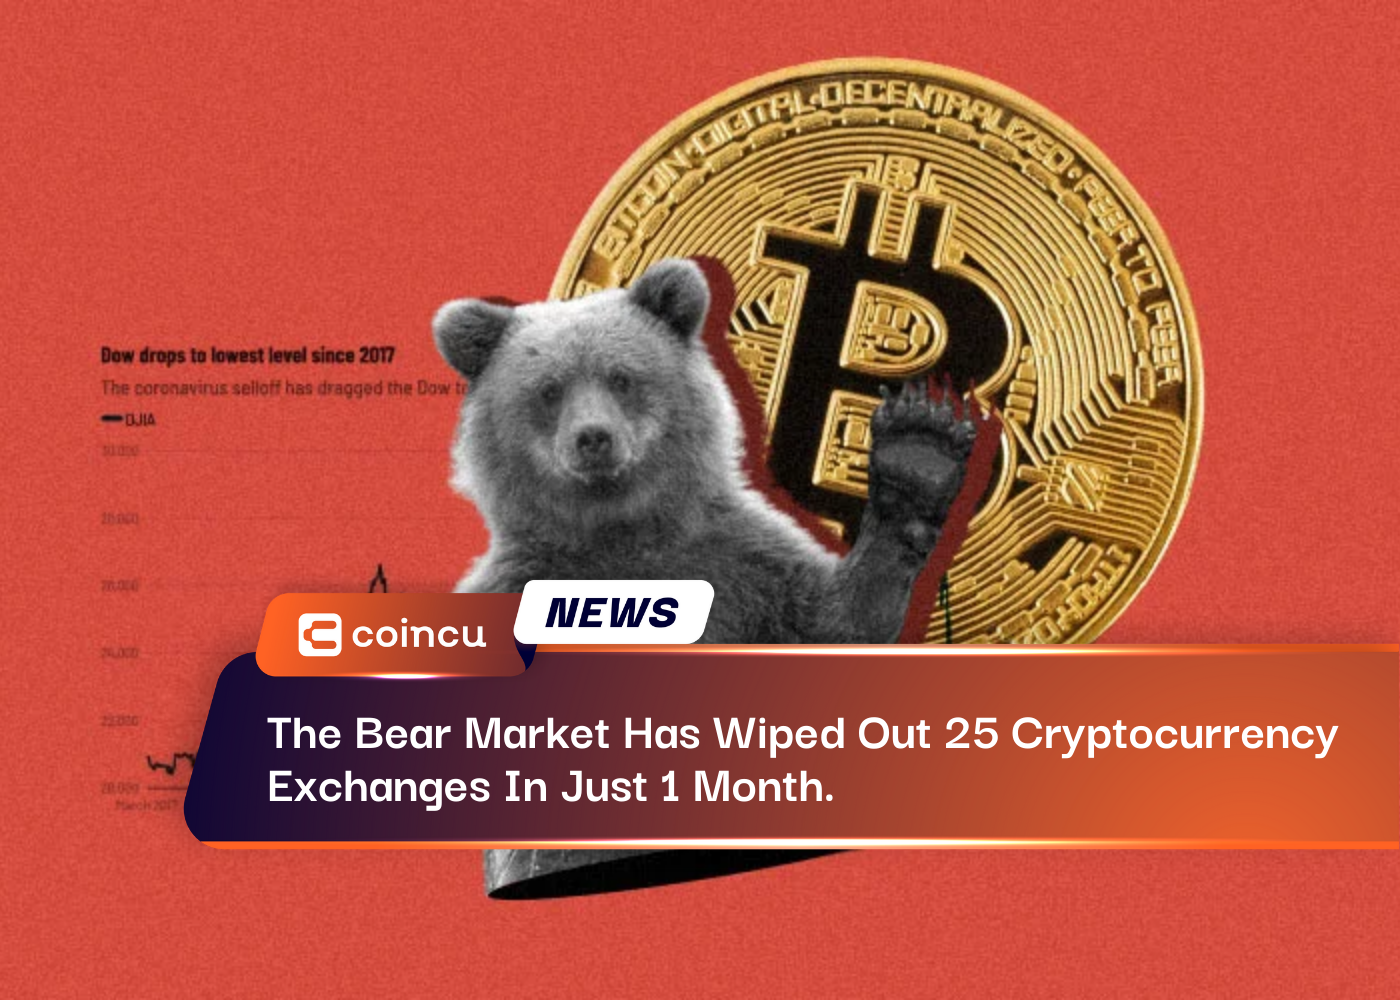 The Bear Market Has Wiped Out 25 Cryptocurrency Exchanges In Just 1 Month.